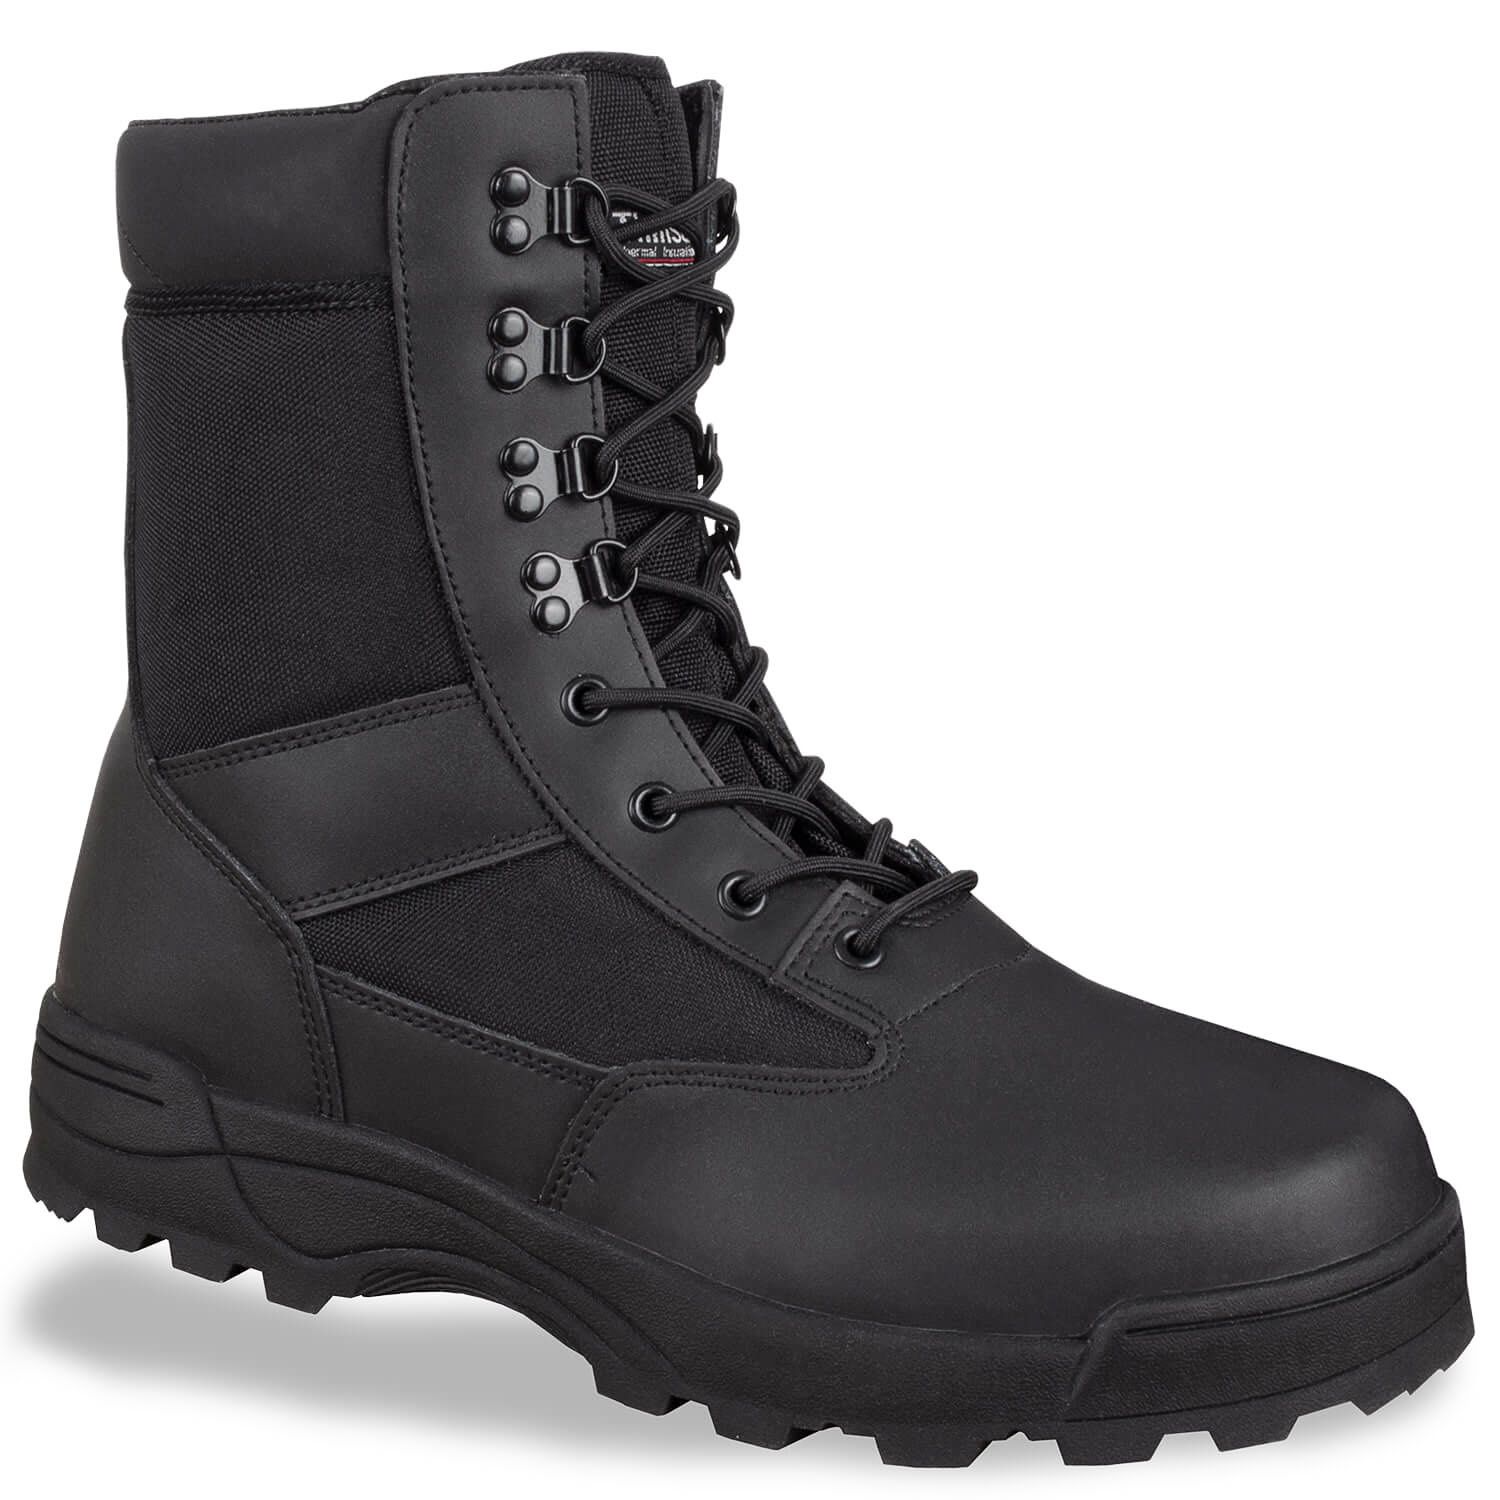 SWAT-Boots